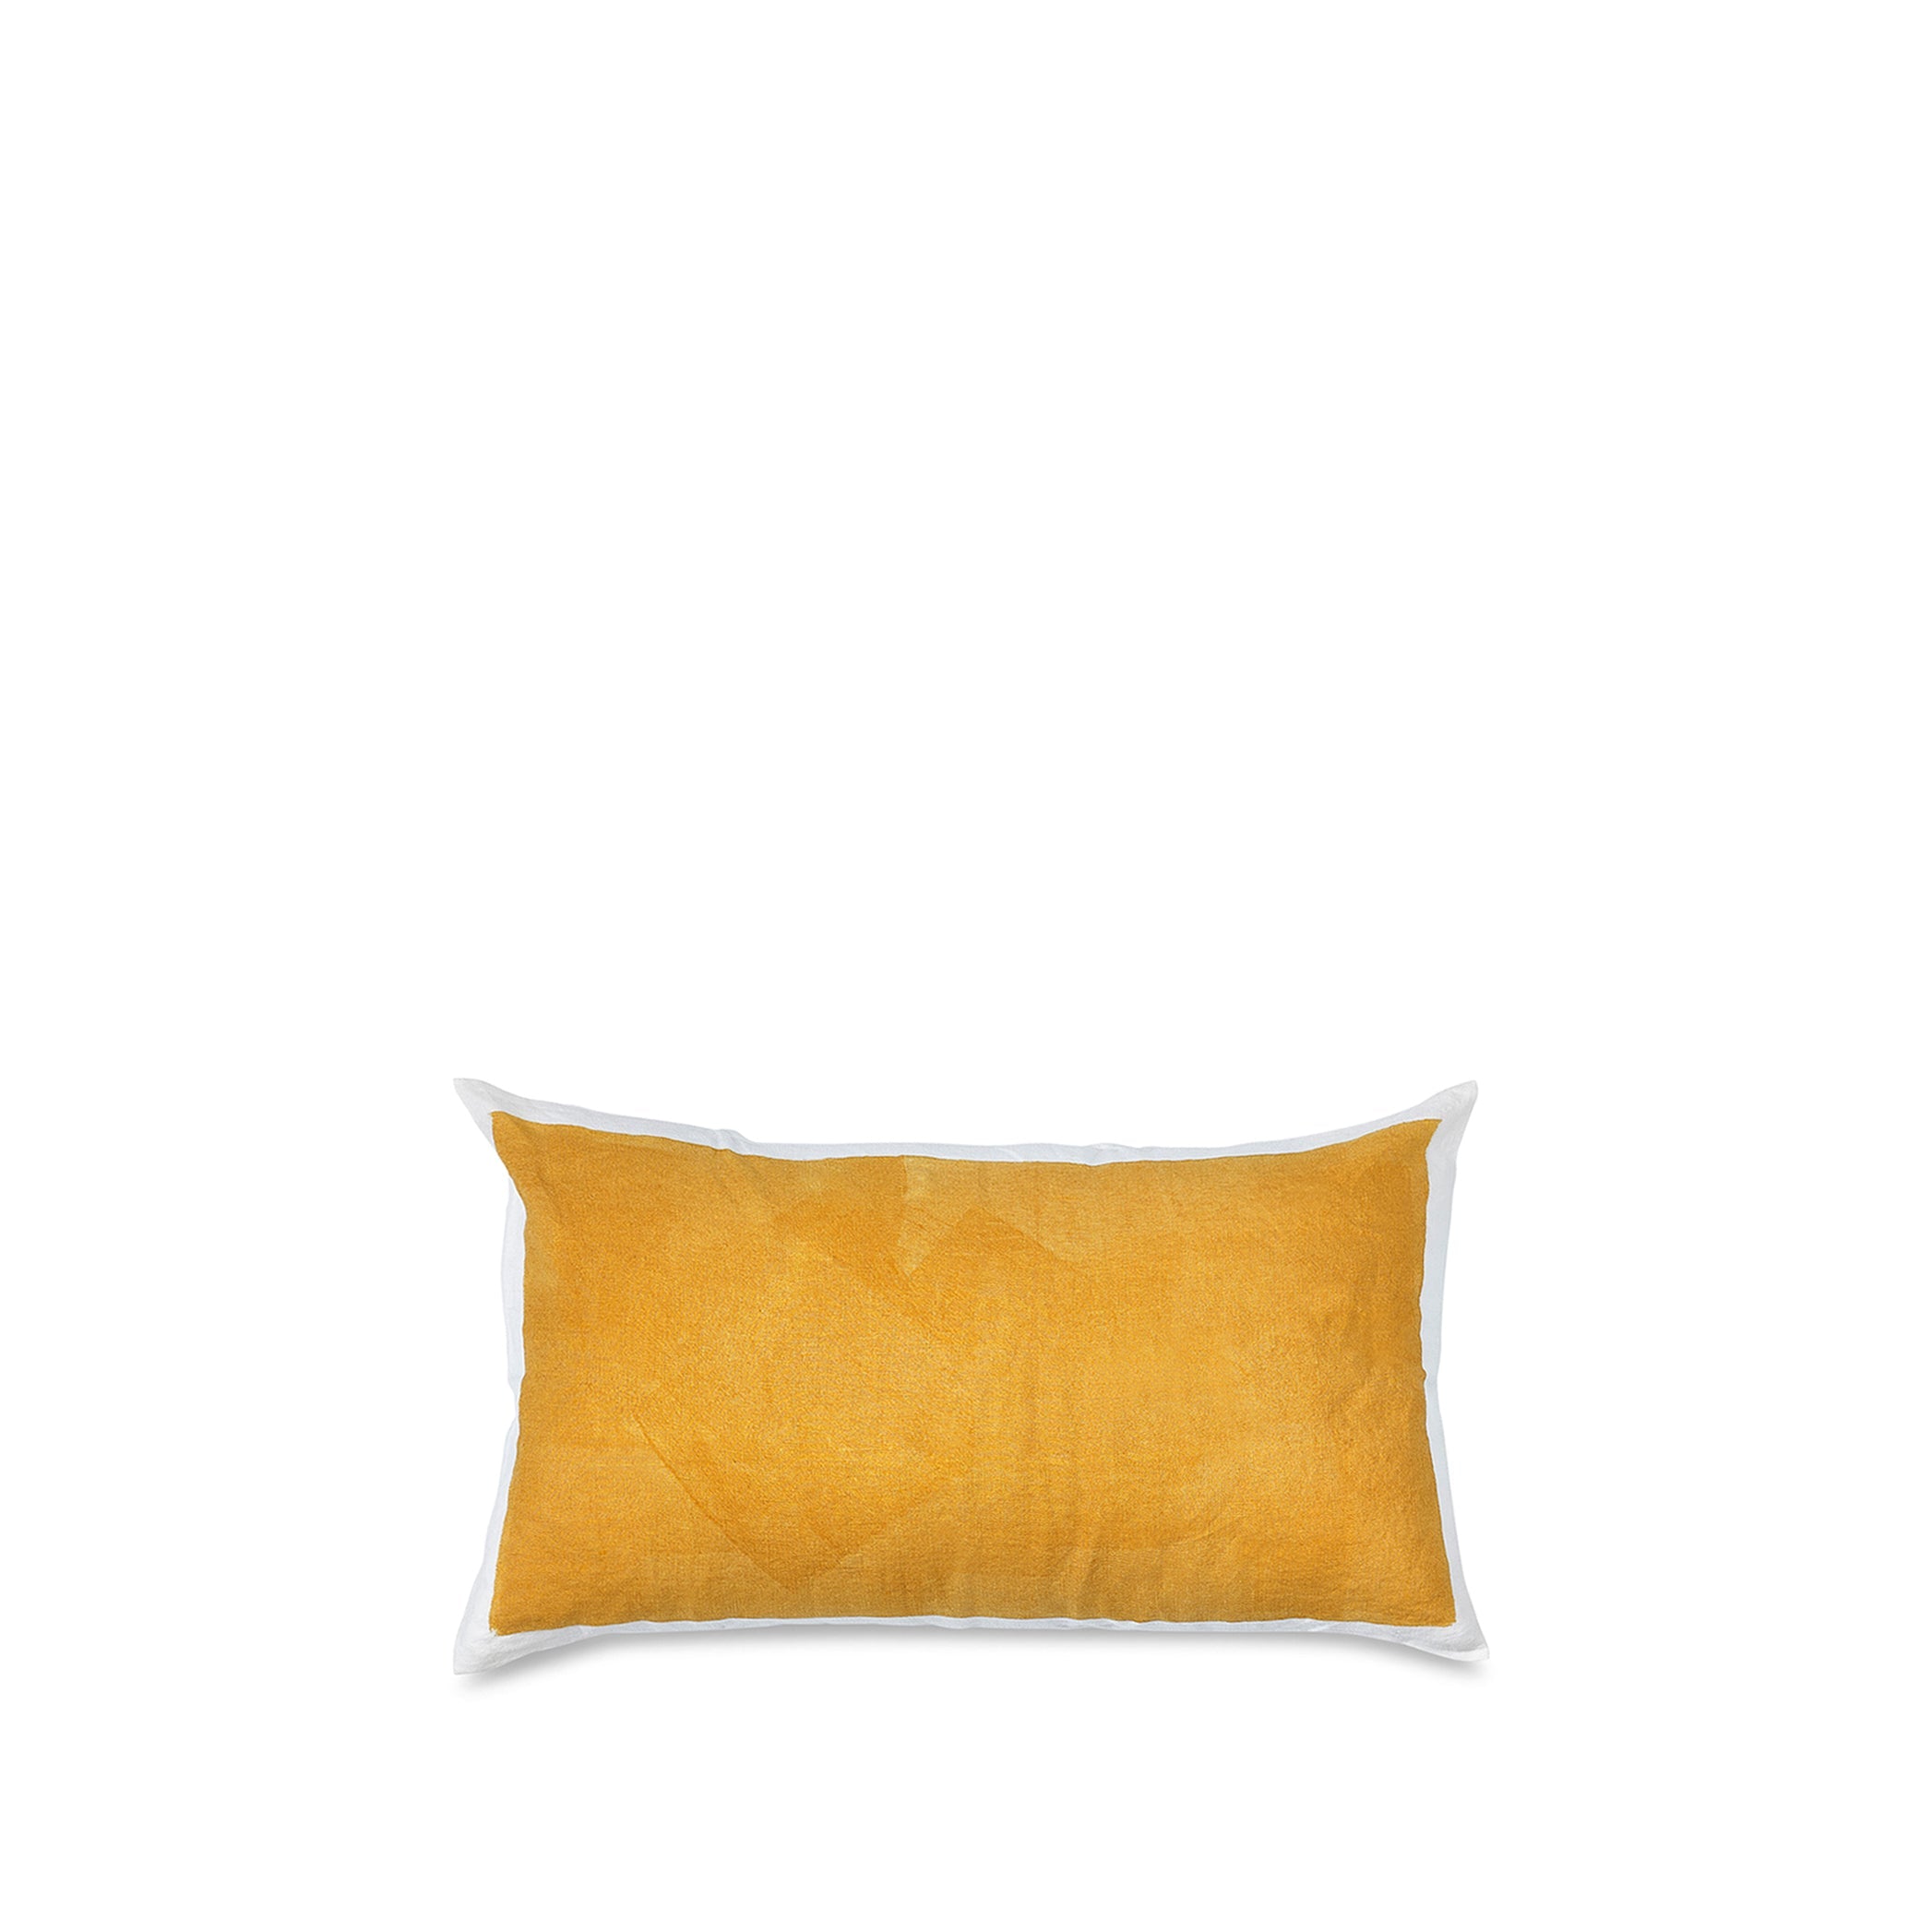 Hand Painted Linen Cushion in Mustard Yellow, 50cm x 30cm